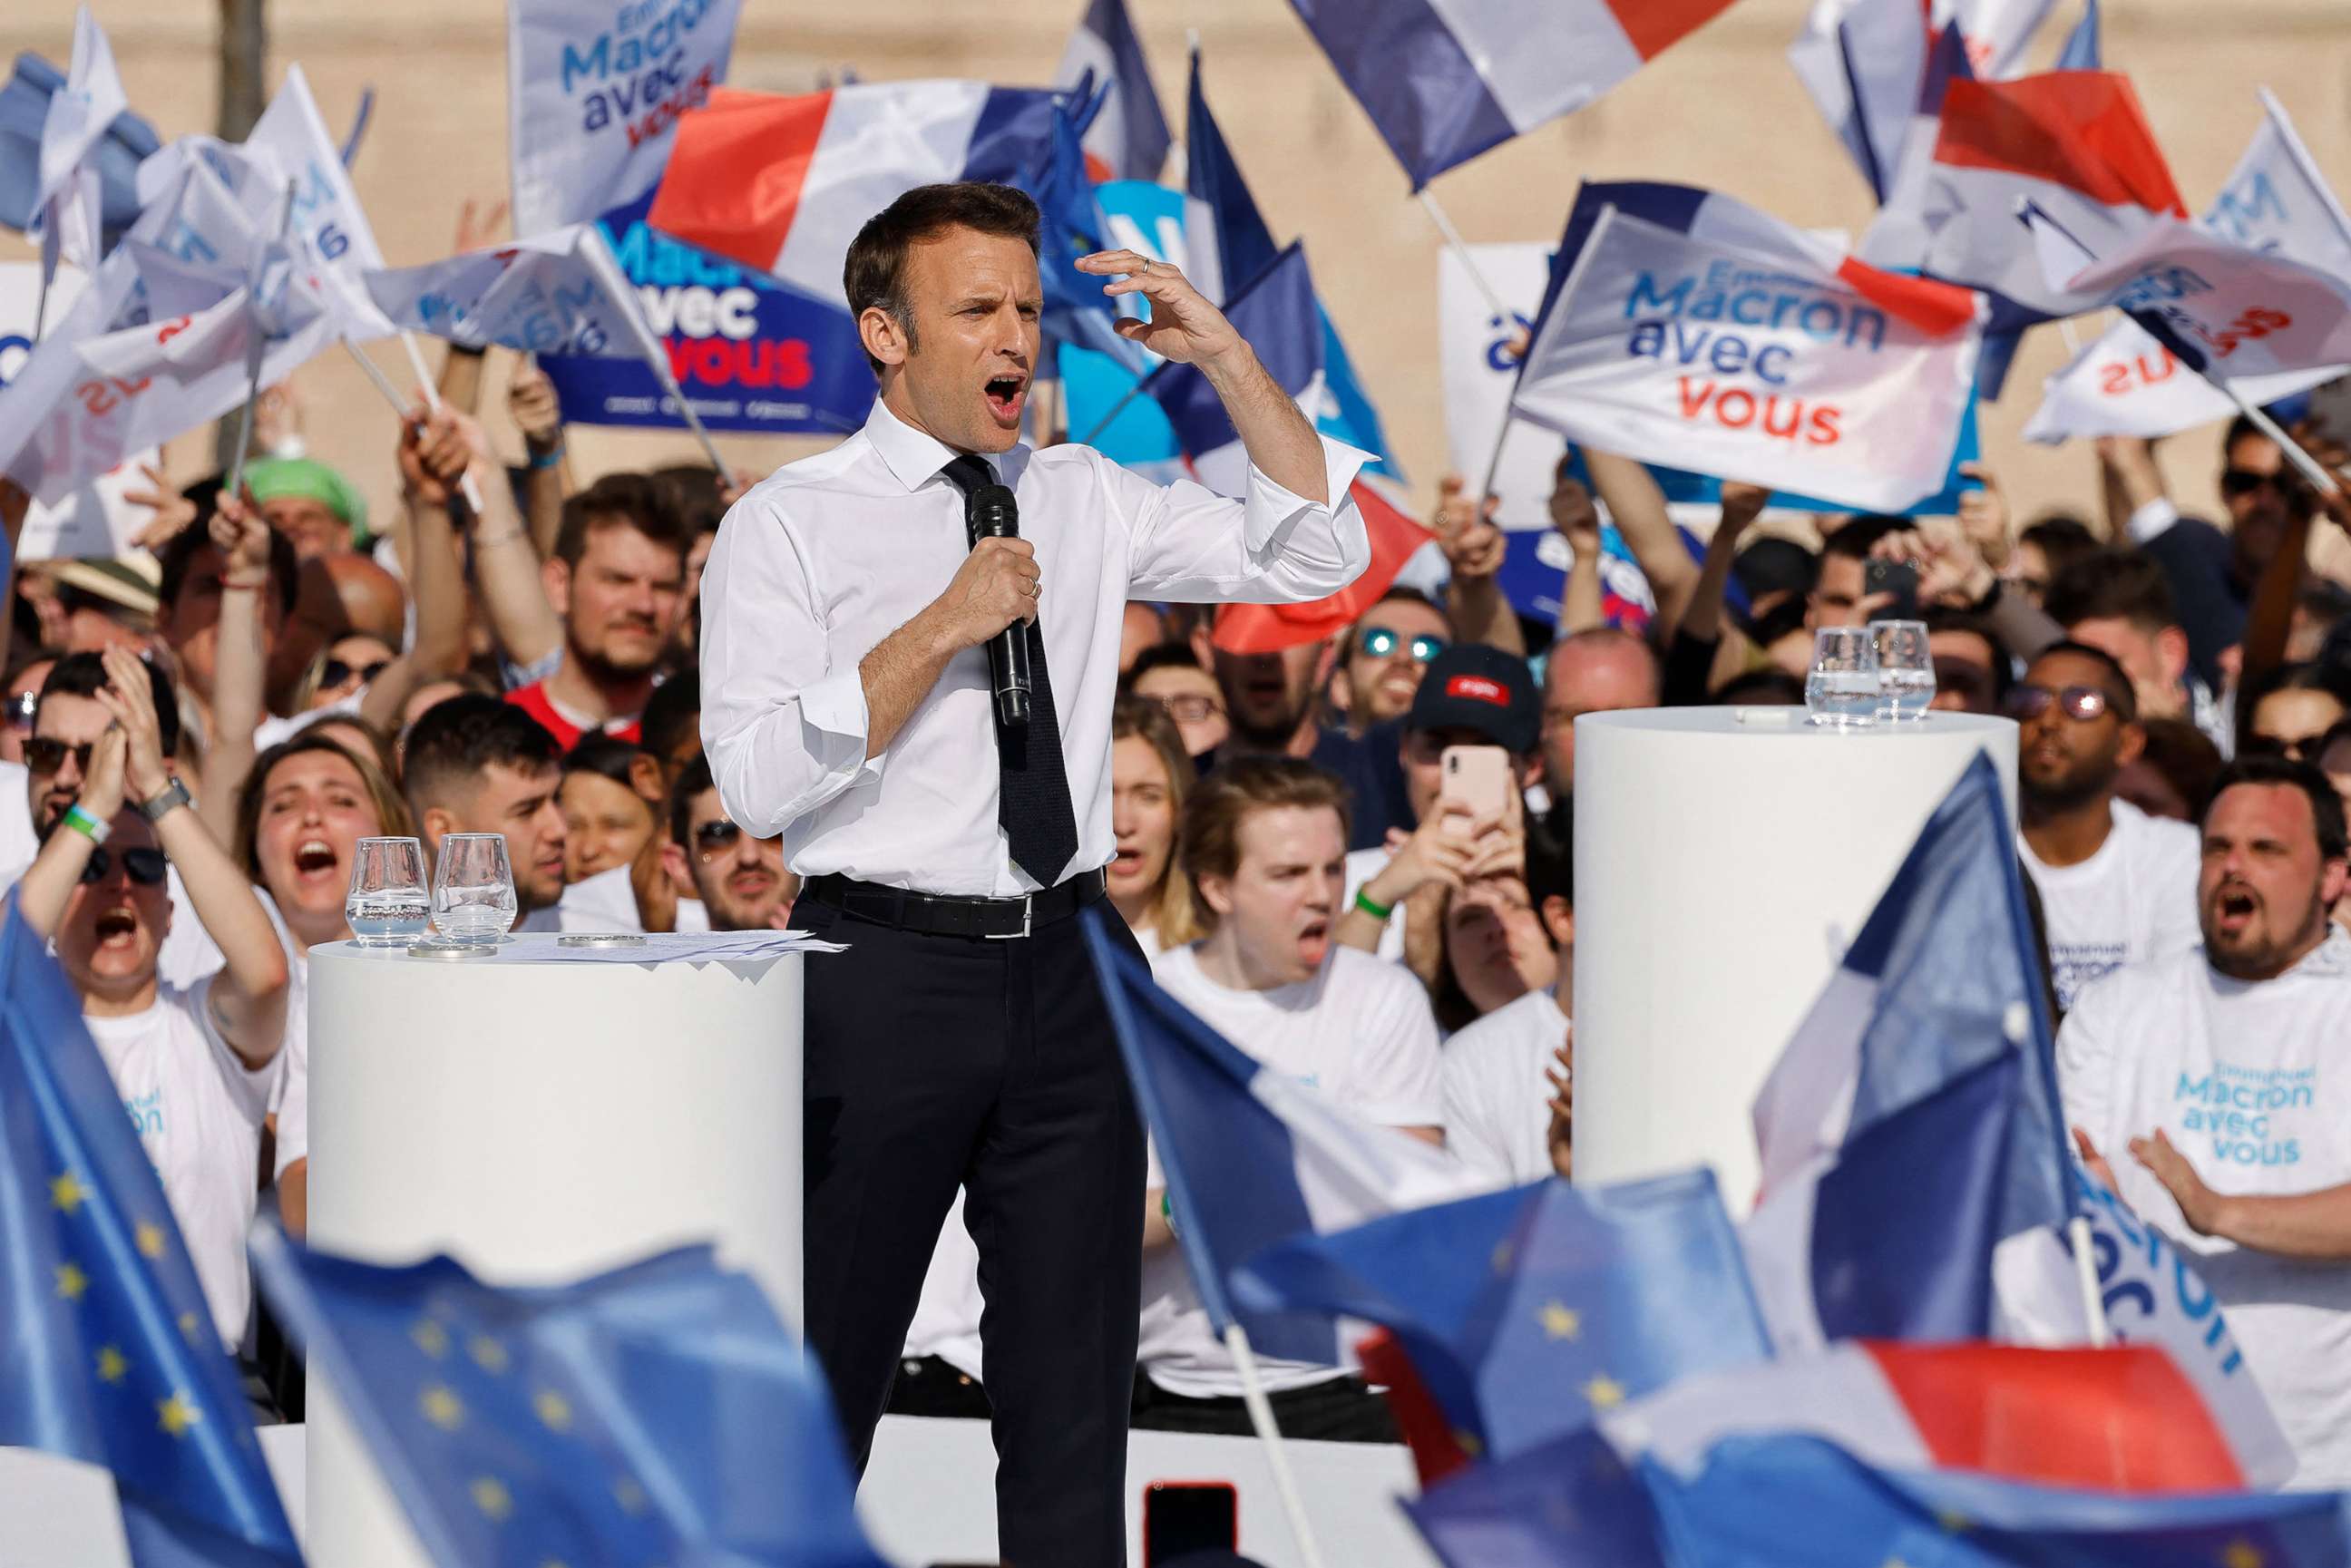 PHOTO: France's President and candidate for re-election Emmanuel Macron, surrounded by supporters, speaks during an election campaign meeting in Marseille, France on April 16, 2022, ahead of the second round of voting in France's presidential election.